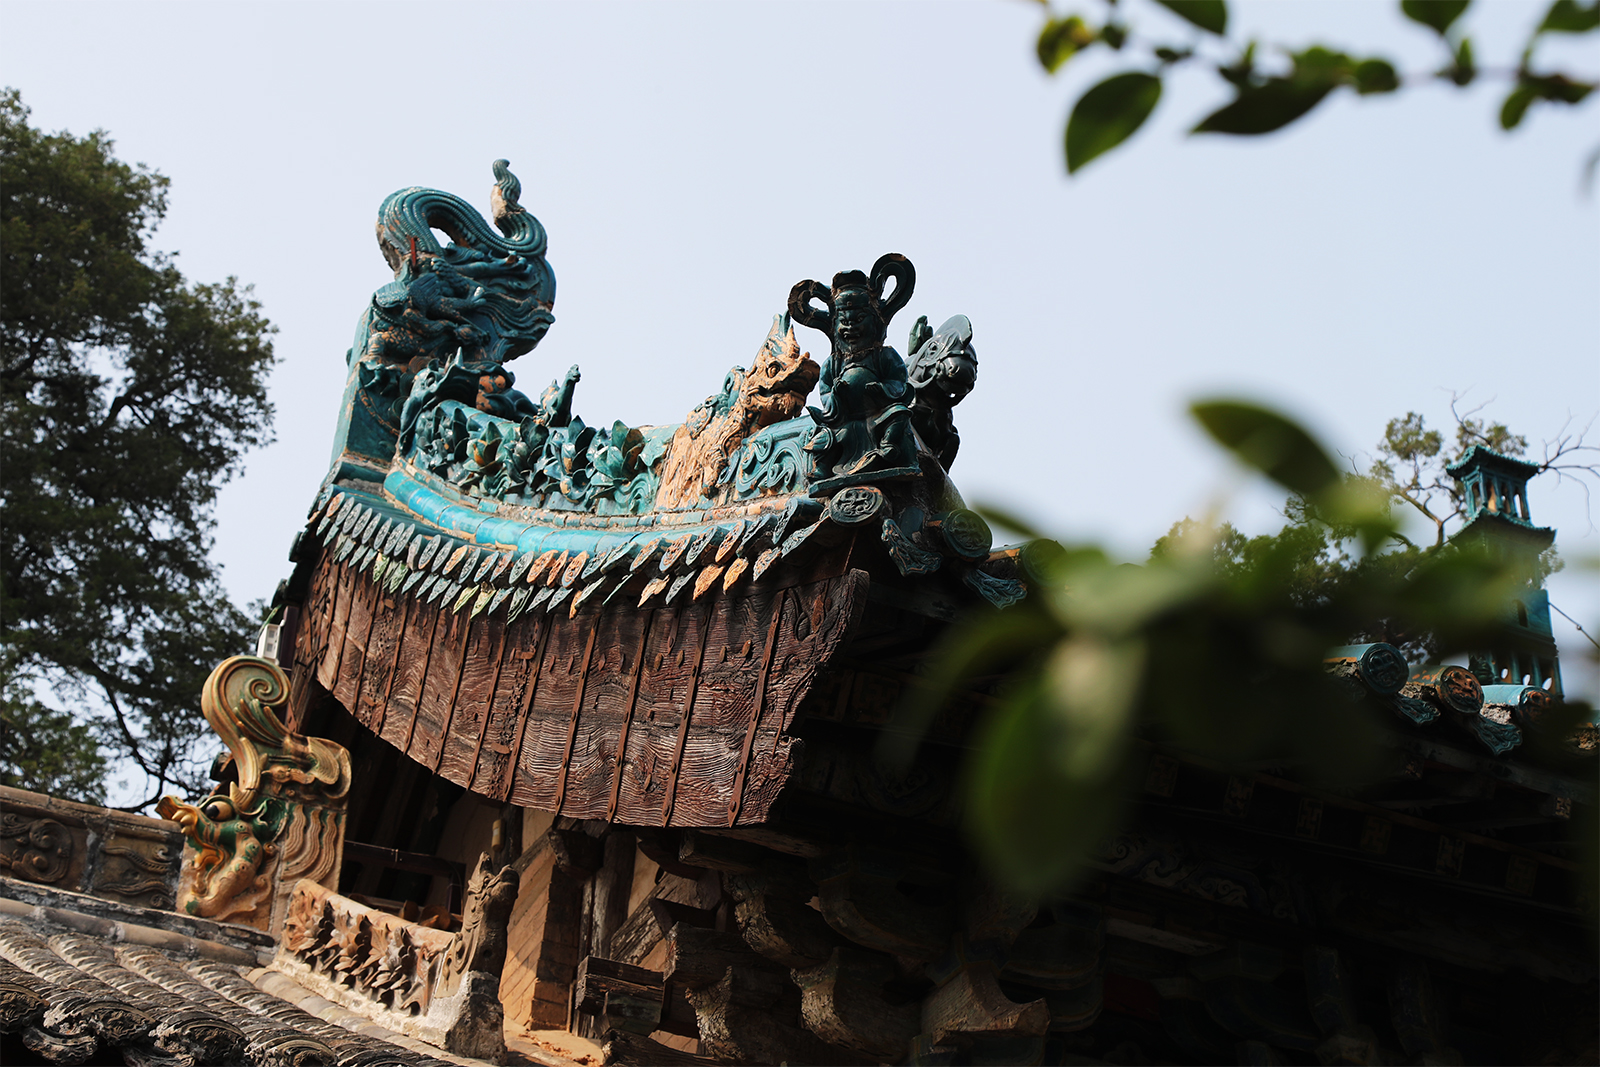 A view of the sculptures on the roof of a building at Jade Emperor Temple in Jincheng, Shanxi Province. /CGTN